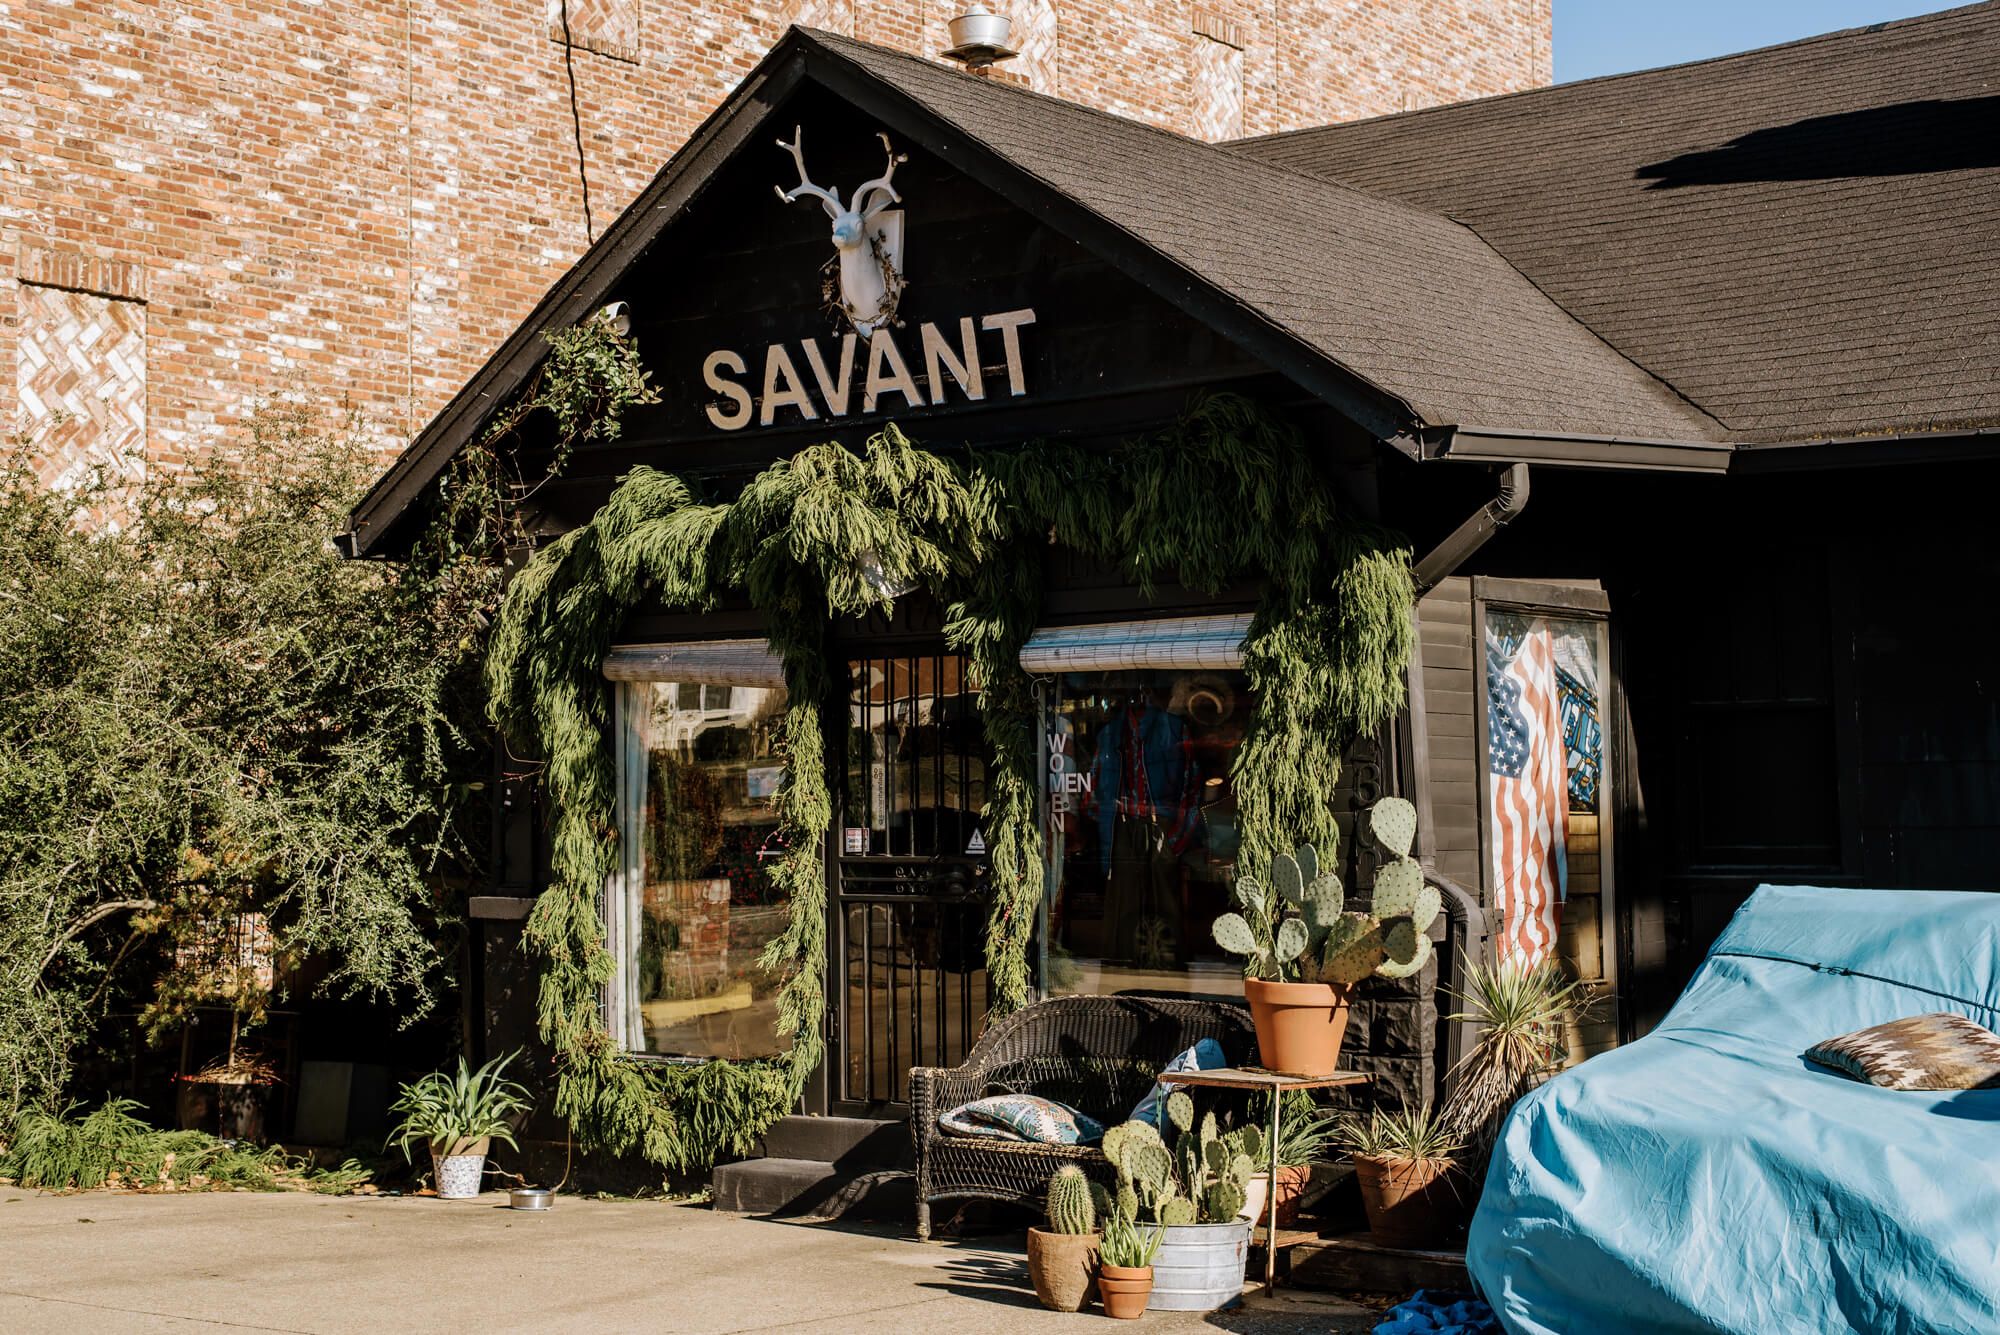 Savant Vintage in Nashville's 12 South neighborhood. It is a vintage store with many plants on sitting against the black exterior.